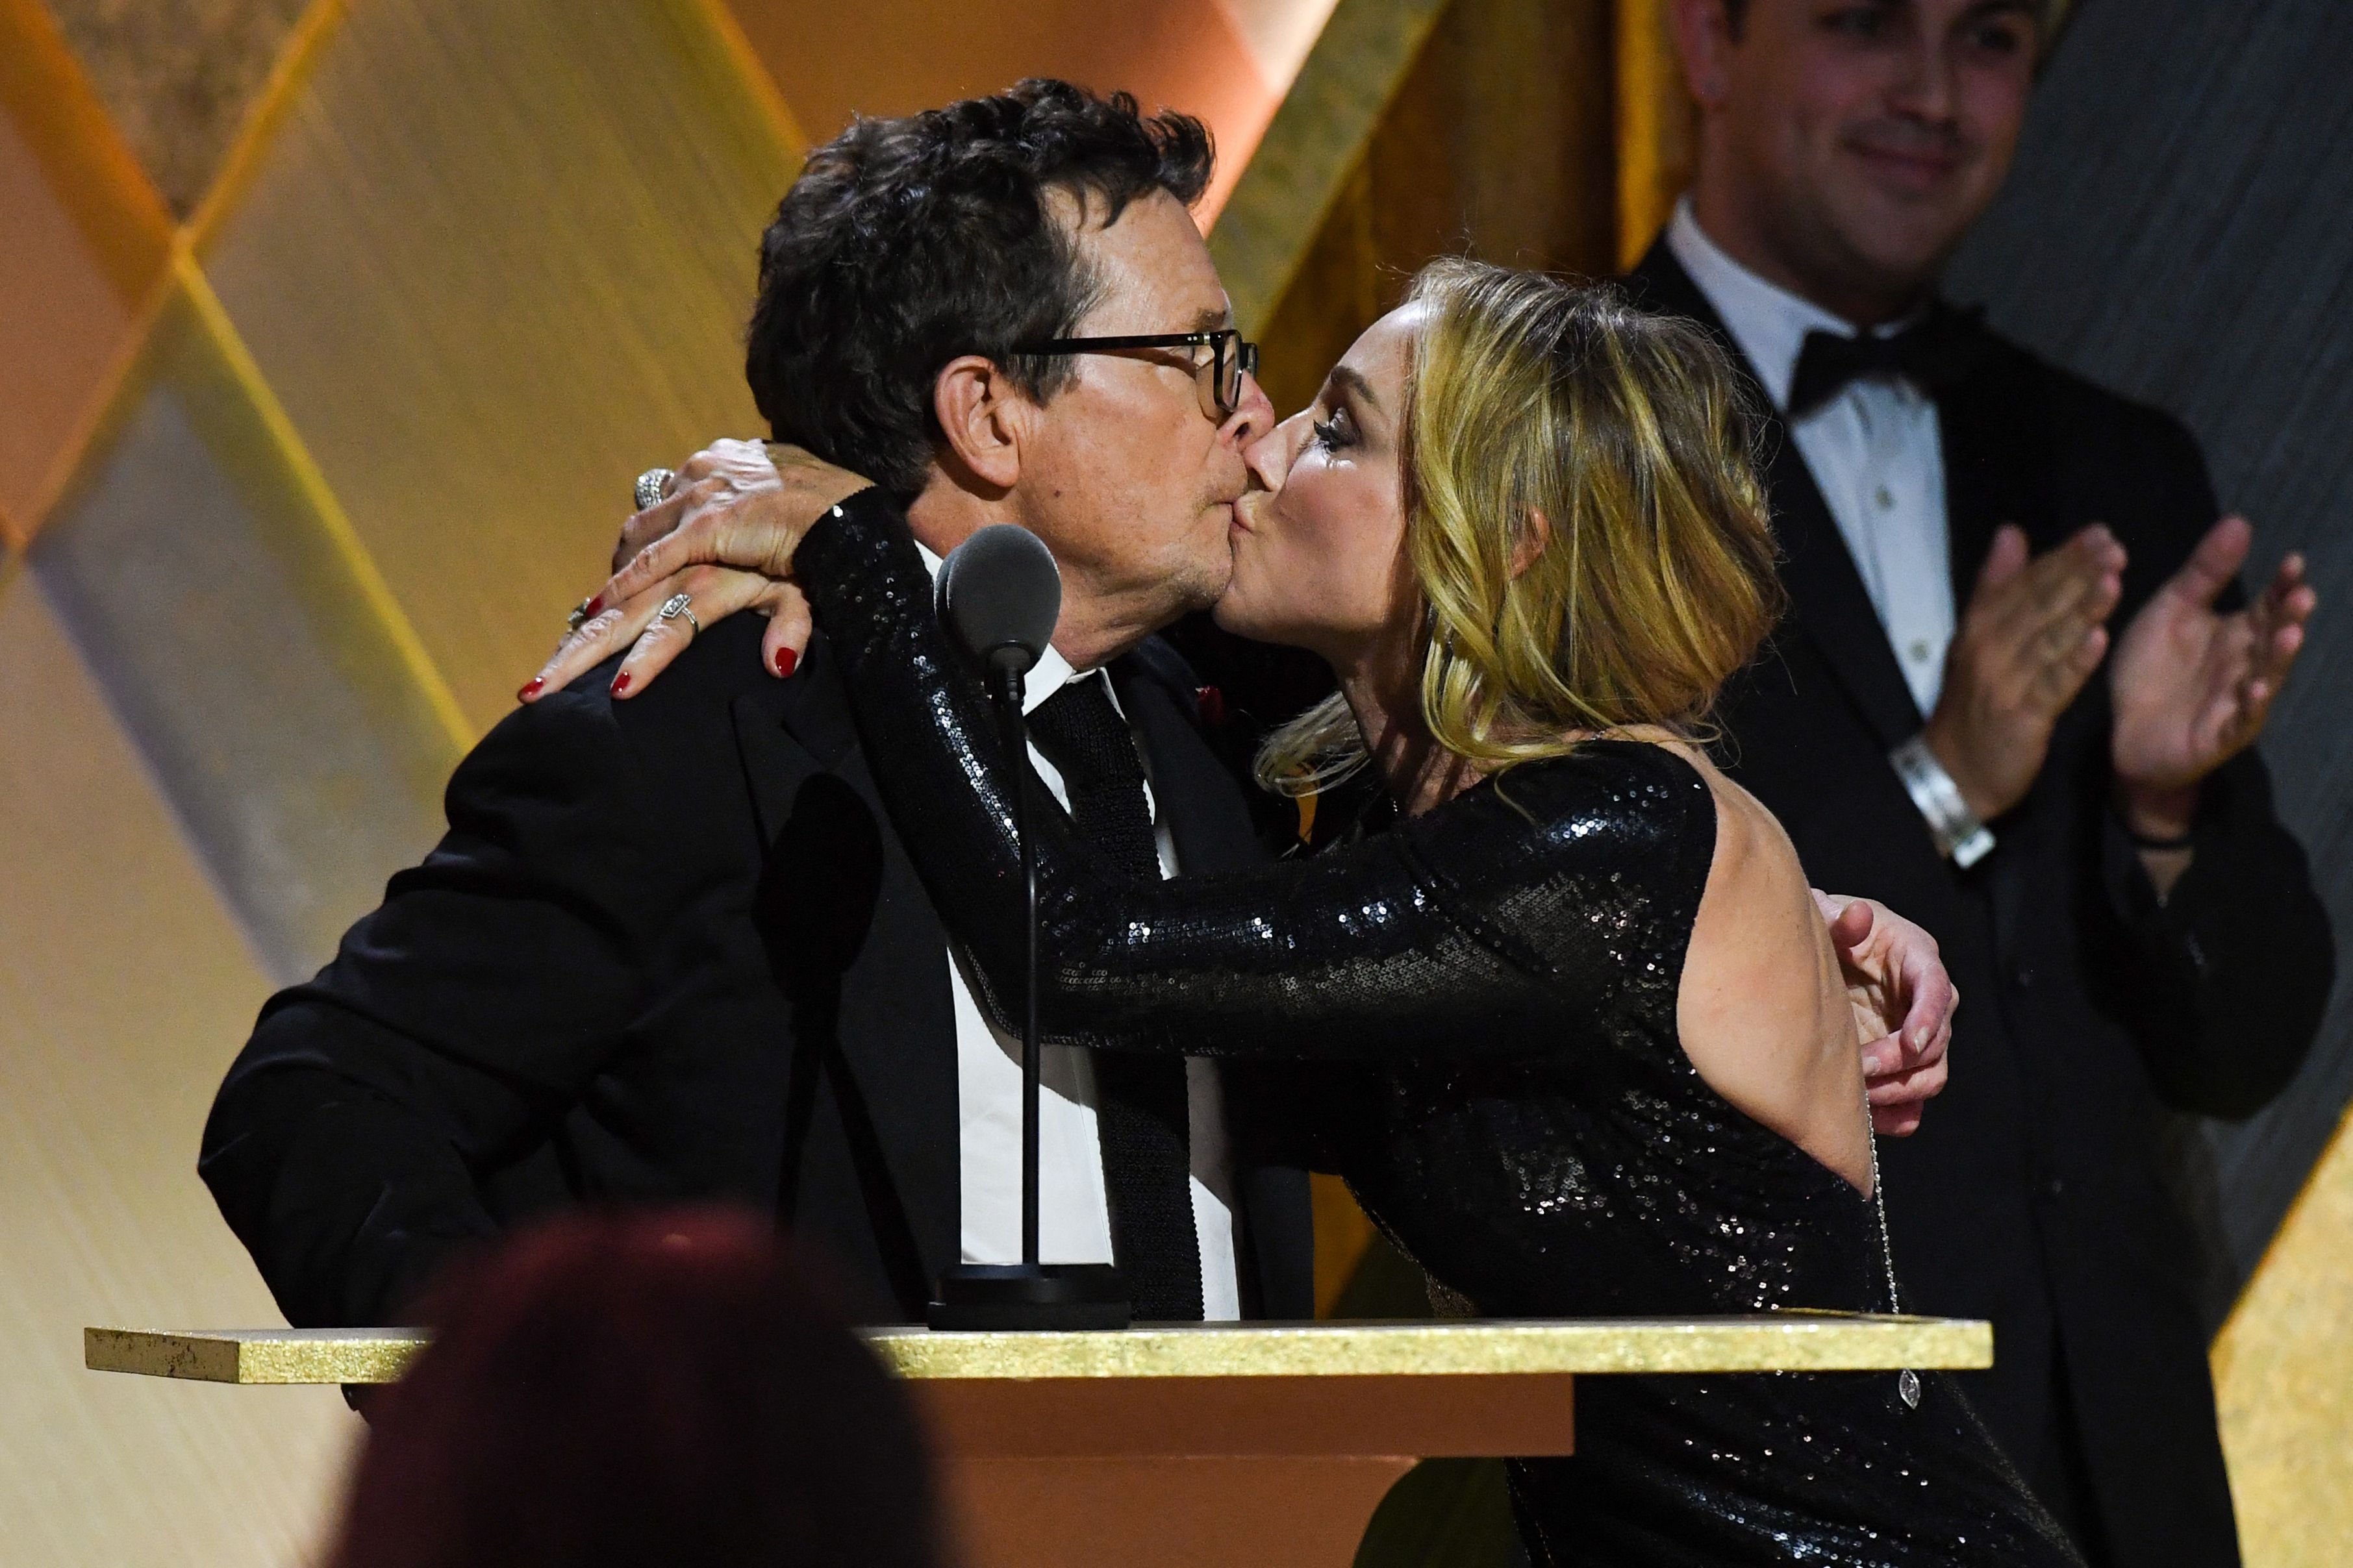 Michael J. Fox kisses his wife Tracy Pollan as he accepts the Jean Hersholt Humanitarian Award during the Academy of Motion Picture Arts and Sciences' 13th Annual Governors Awards at the Fairmont Century Plaza in Los Angeles on November 19, 2022. | Source: Getty Images